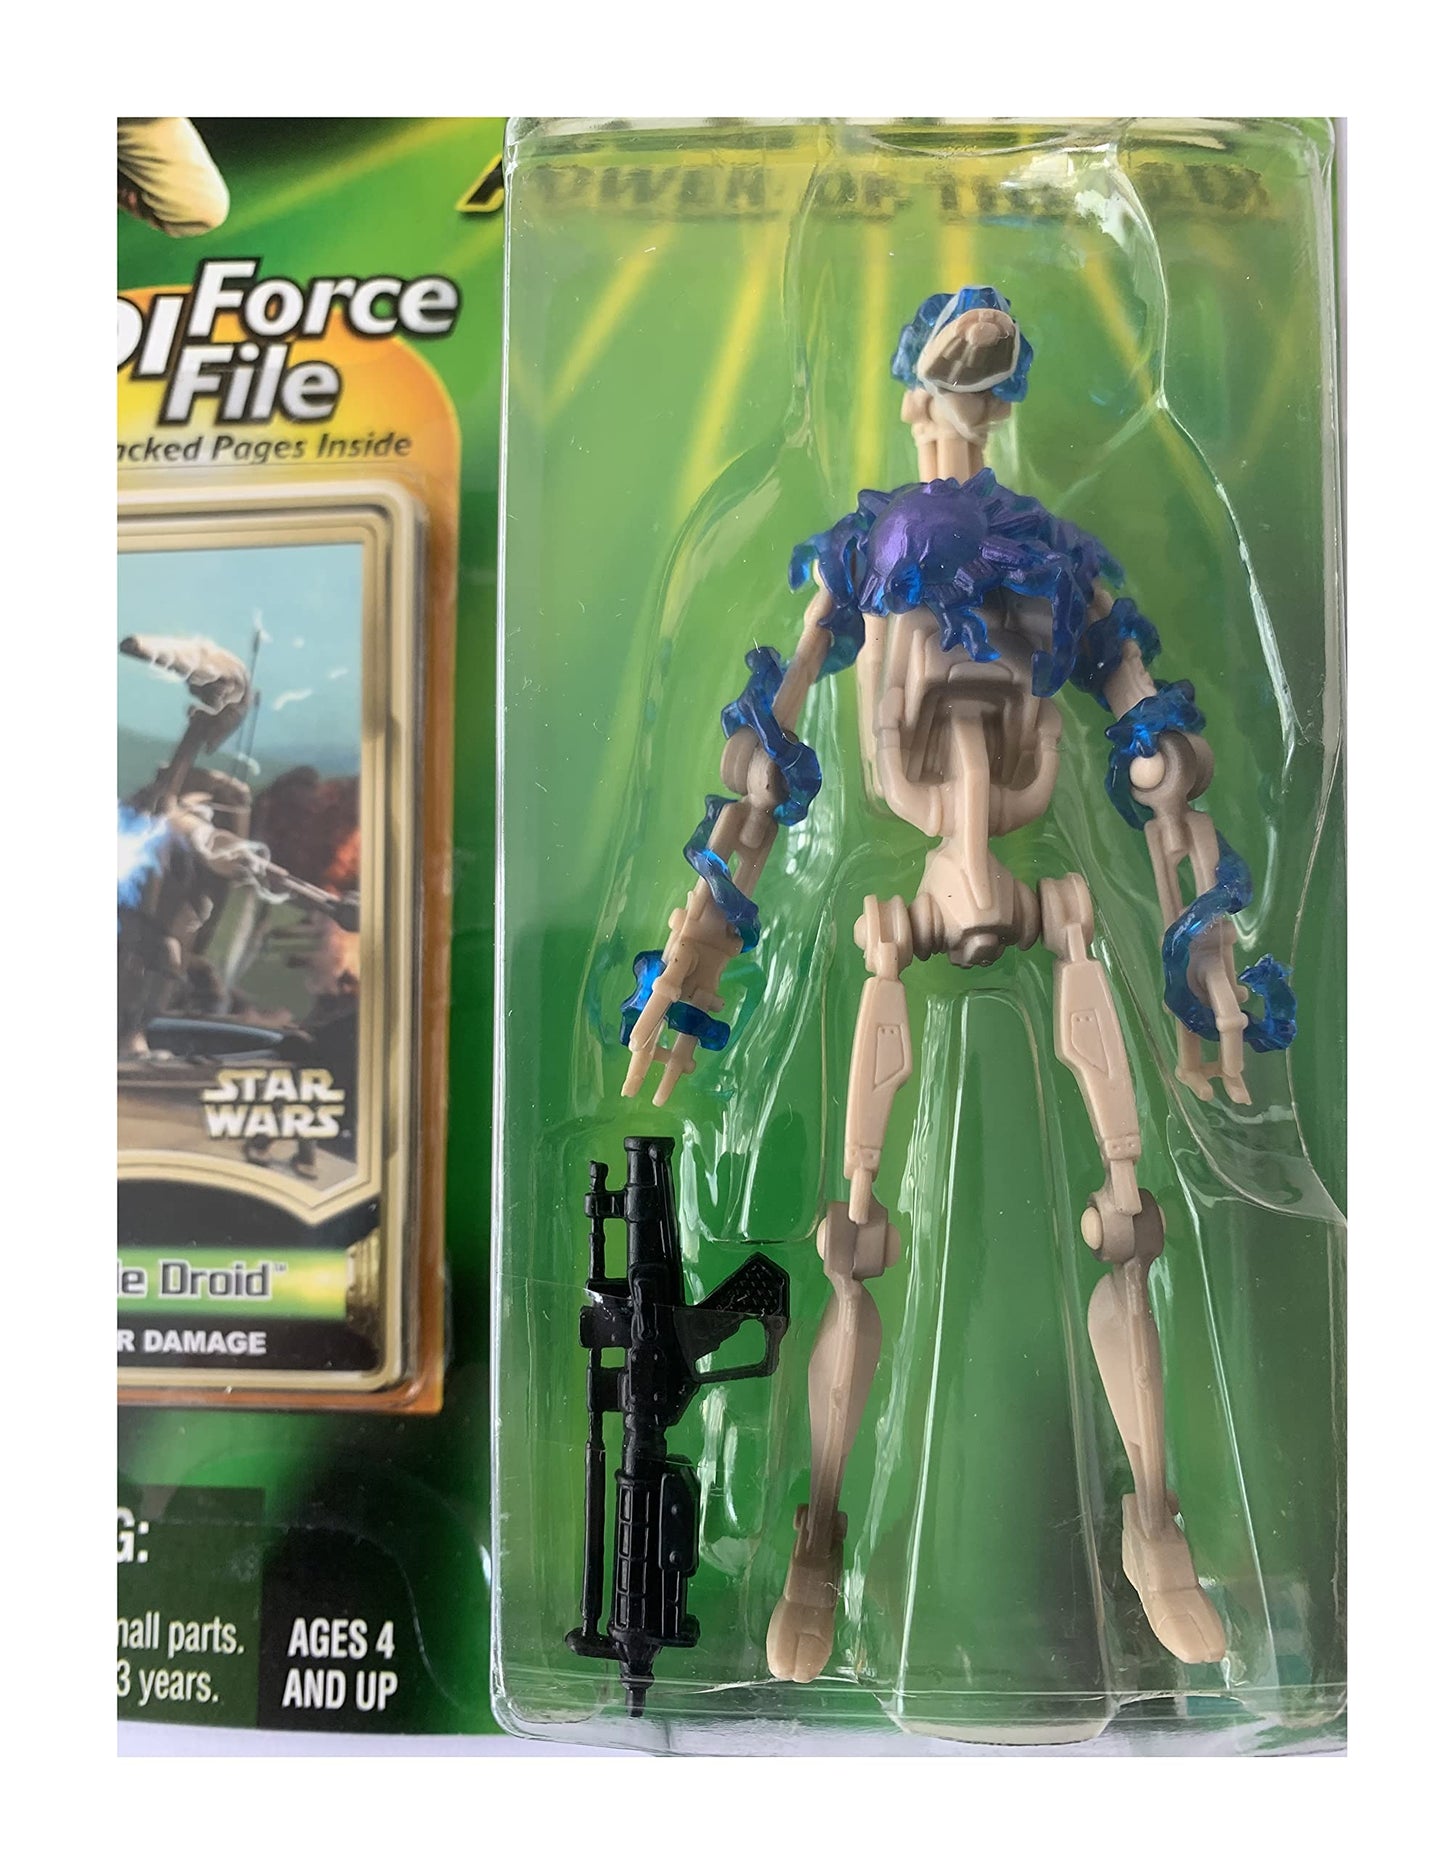 Vintage 2000 Star Wars The Power Of The Jedi Battle Droid With Boomer Damage Action Figure - Brand New Factory Sealed Shop Stock Room Find